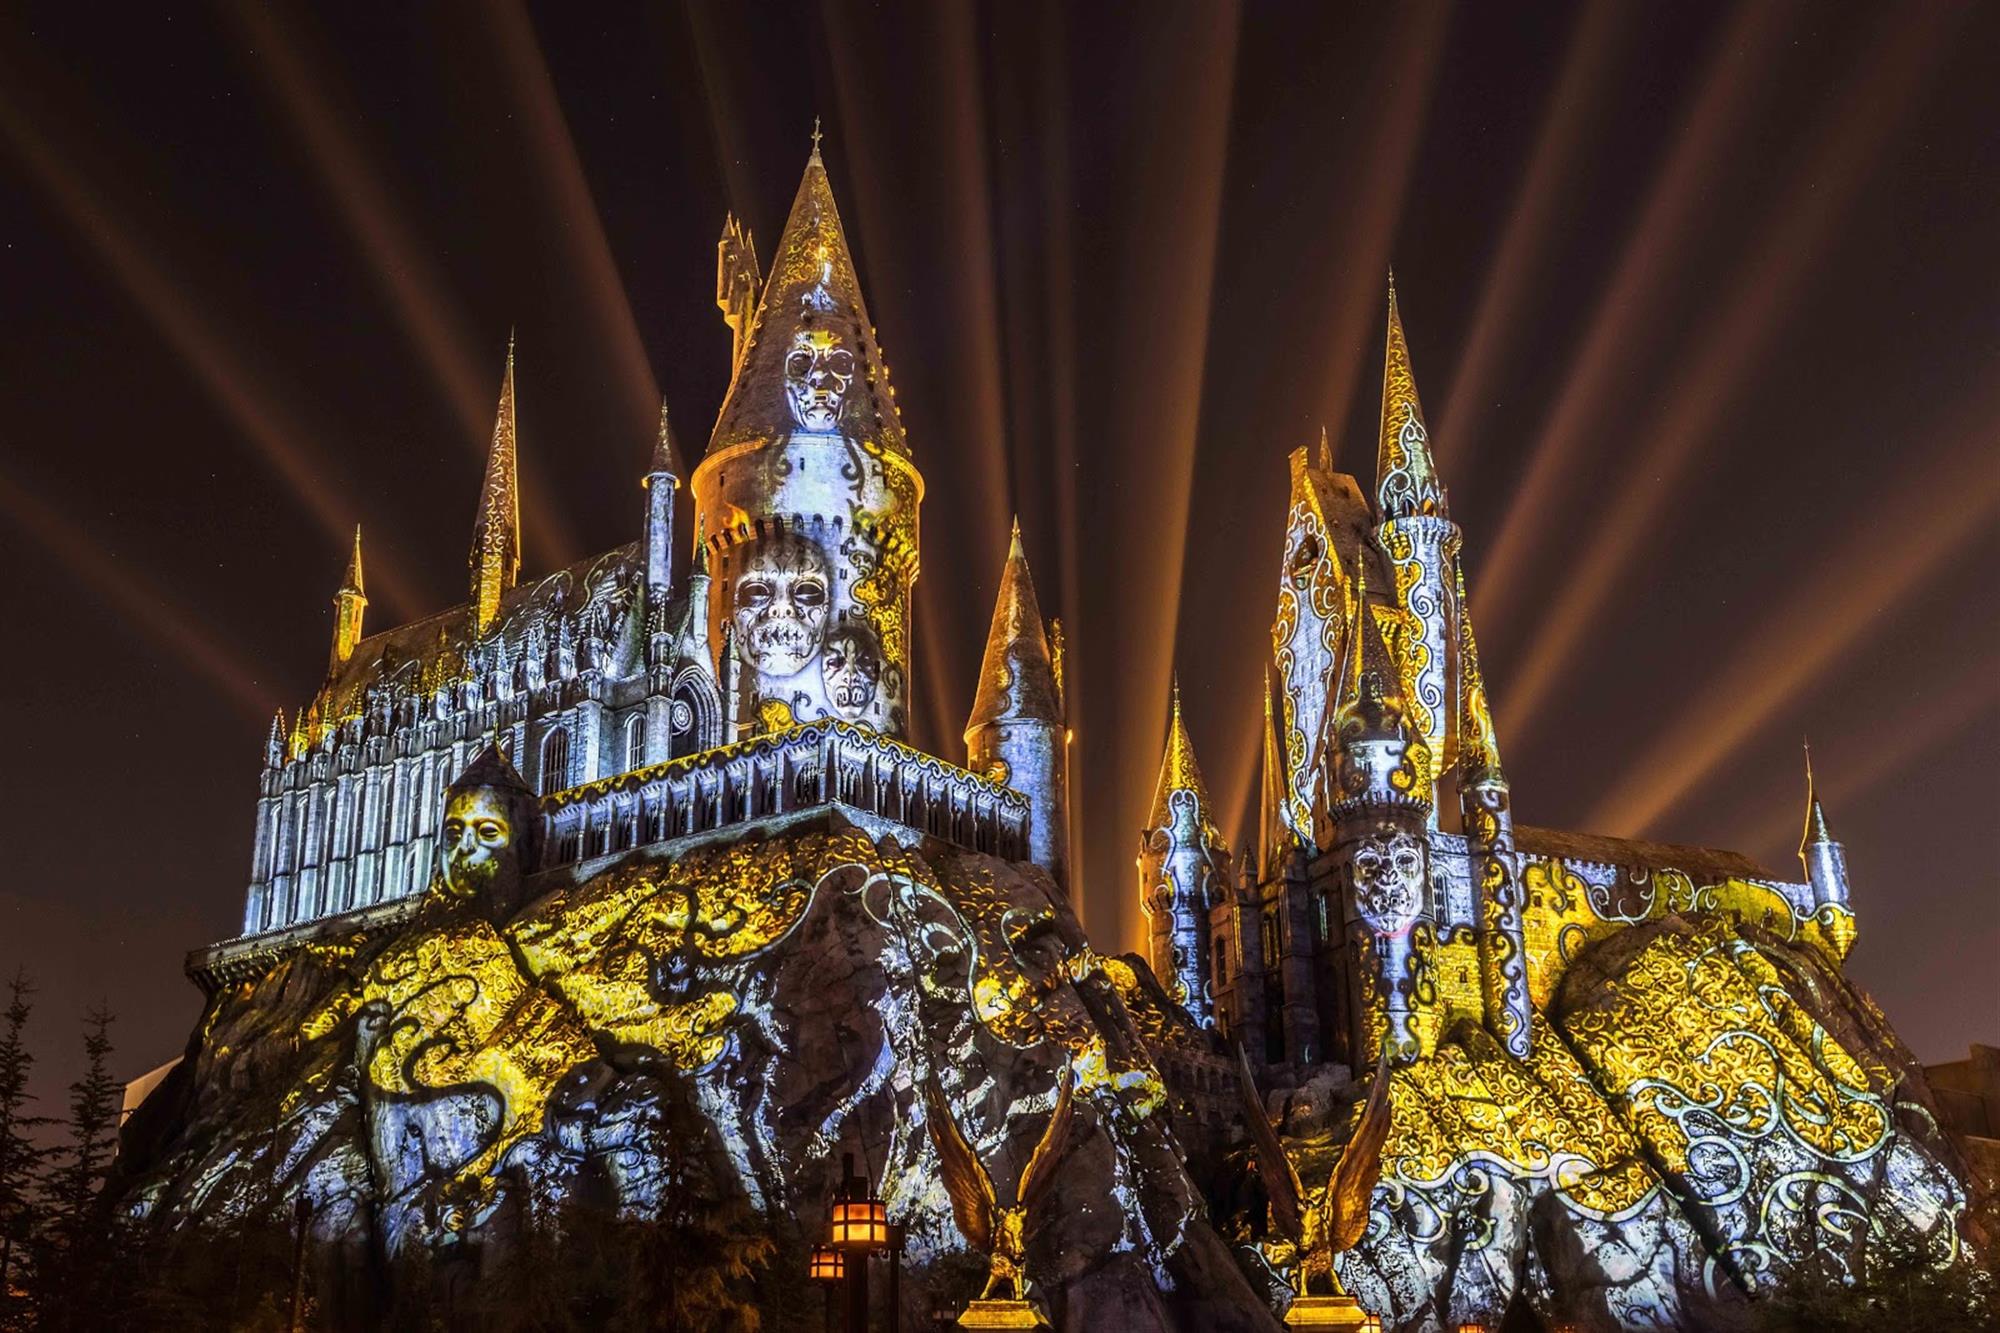 "Dark Arts at Hogwarts Castle" Projection Show Premieres at Universal